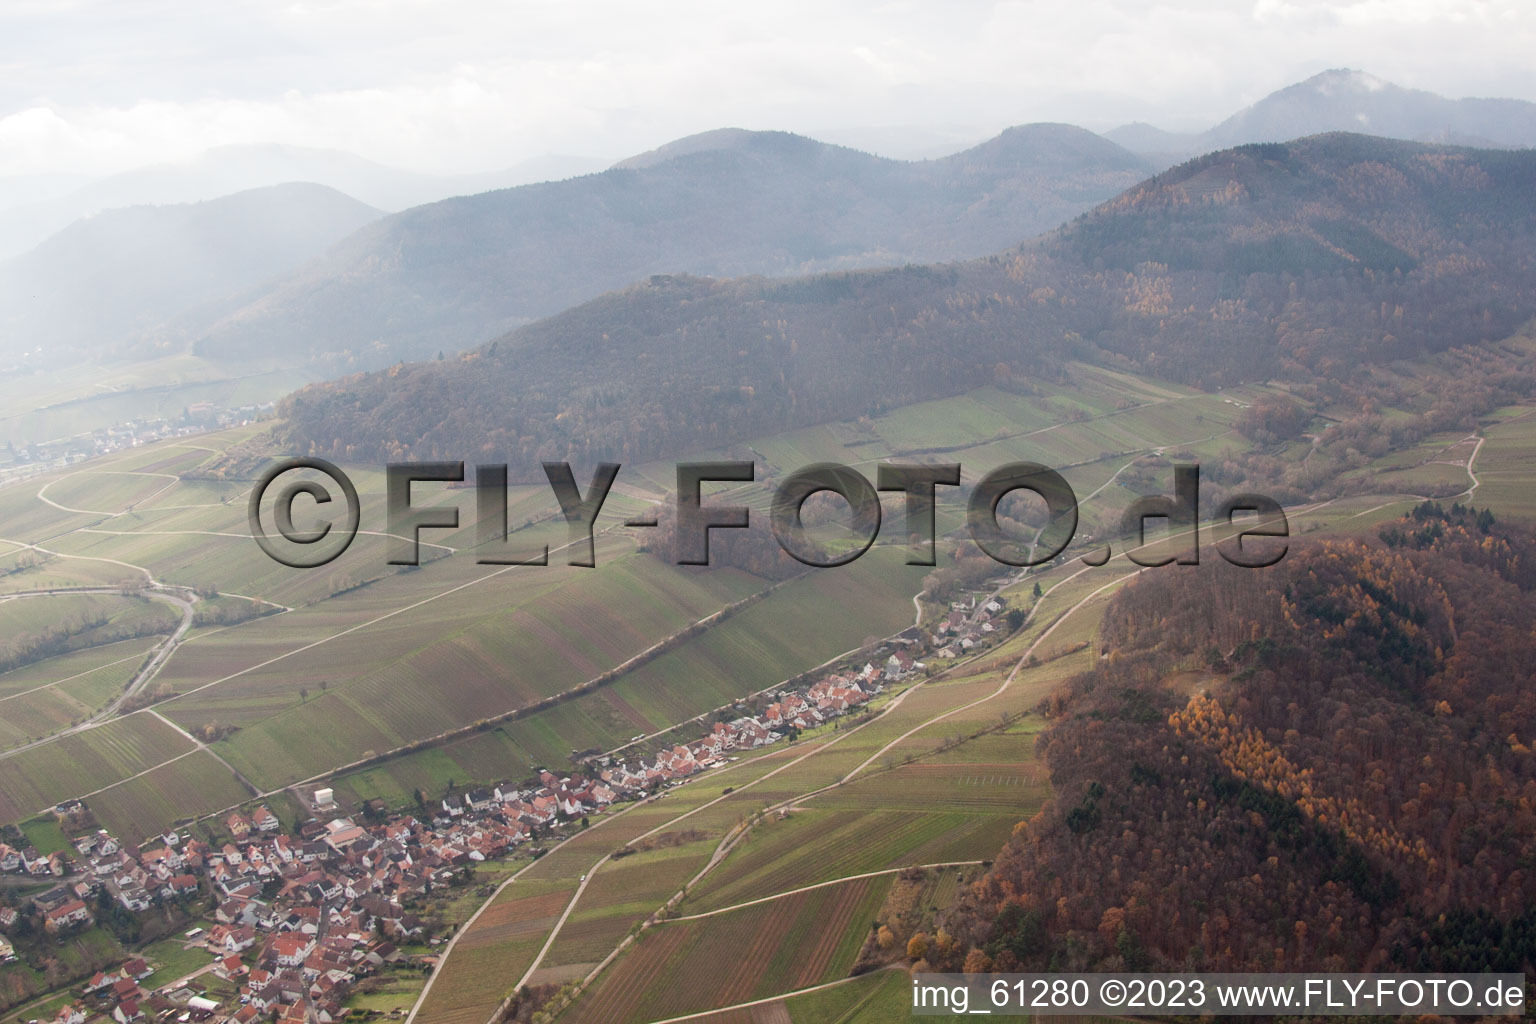 Birkweiler in the state Rhineland-Palatinate, Germany from above